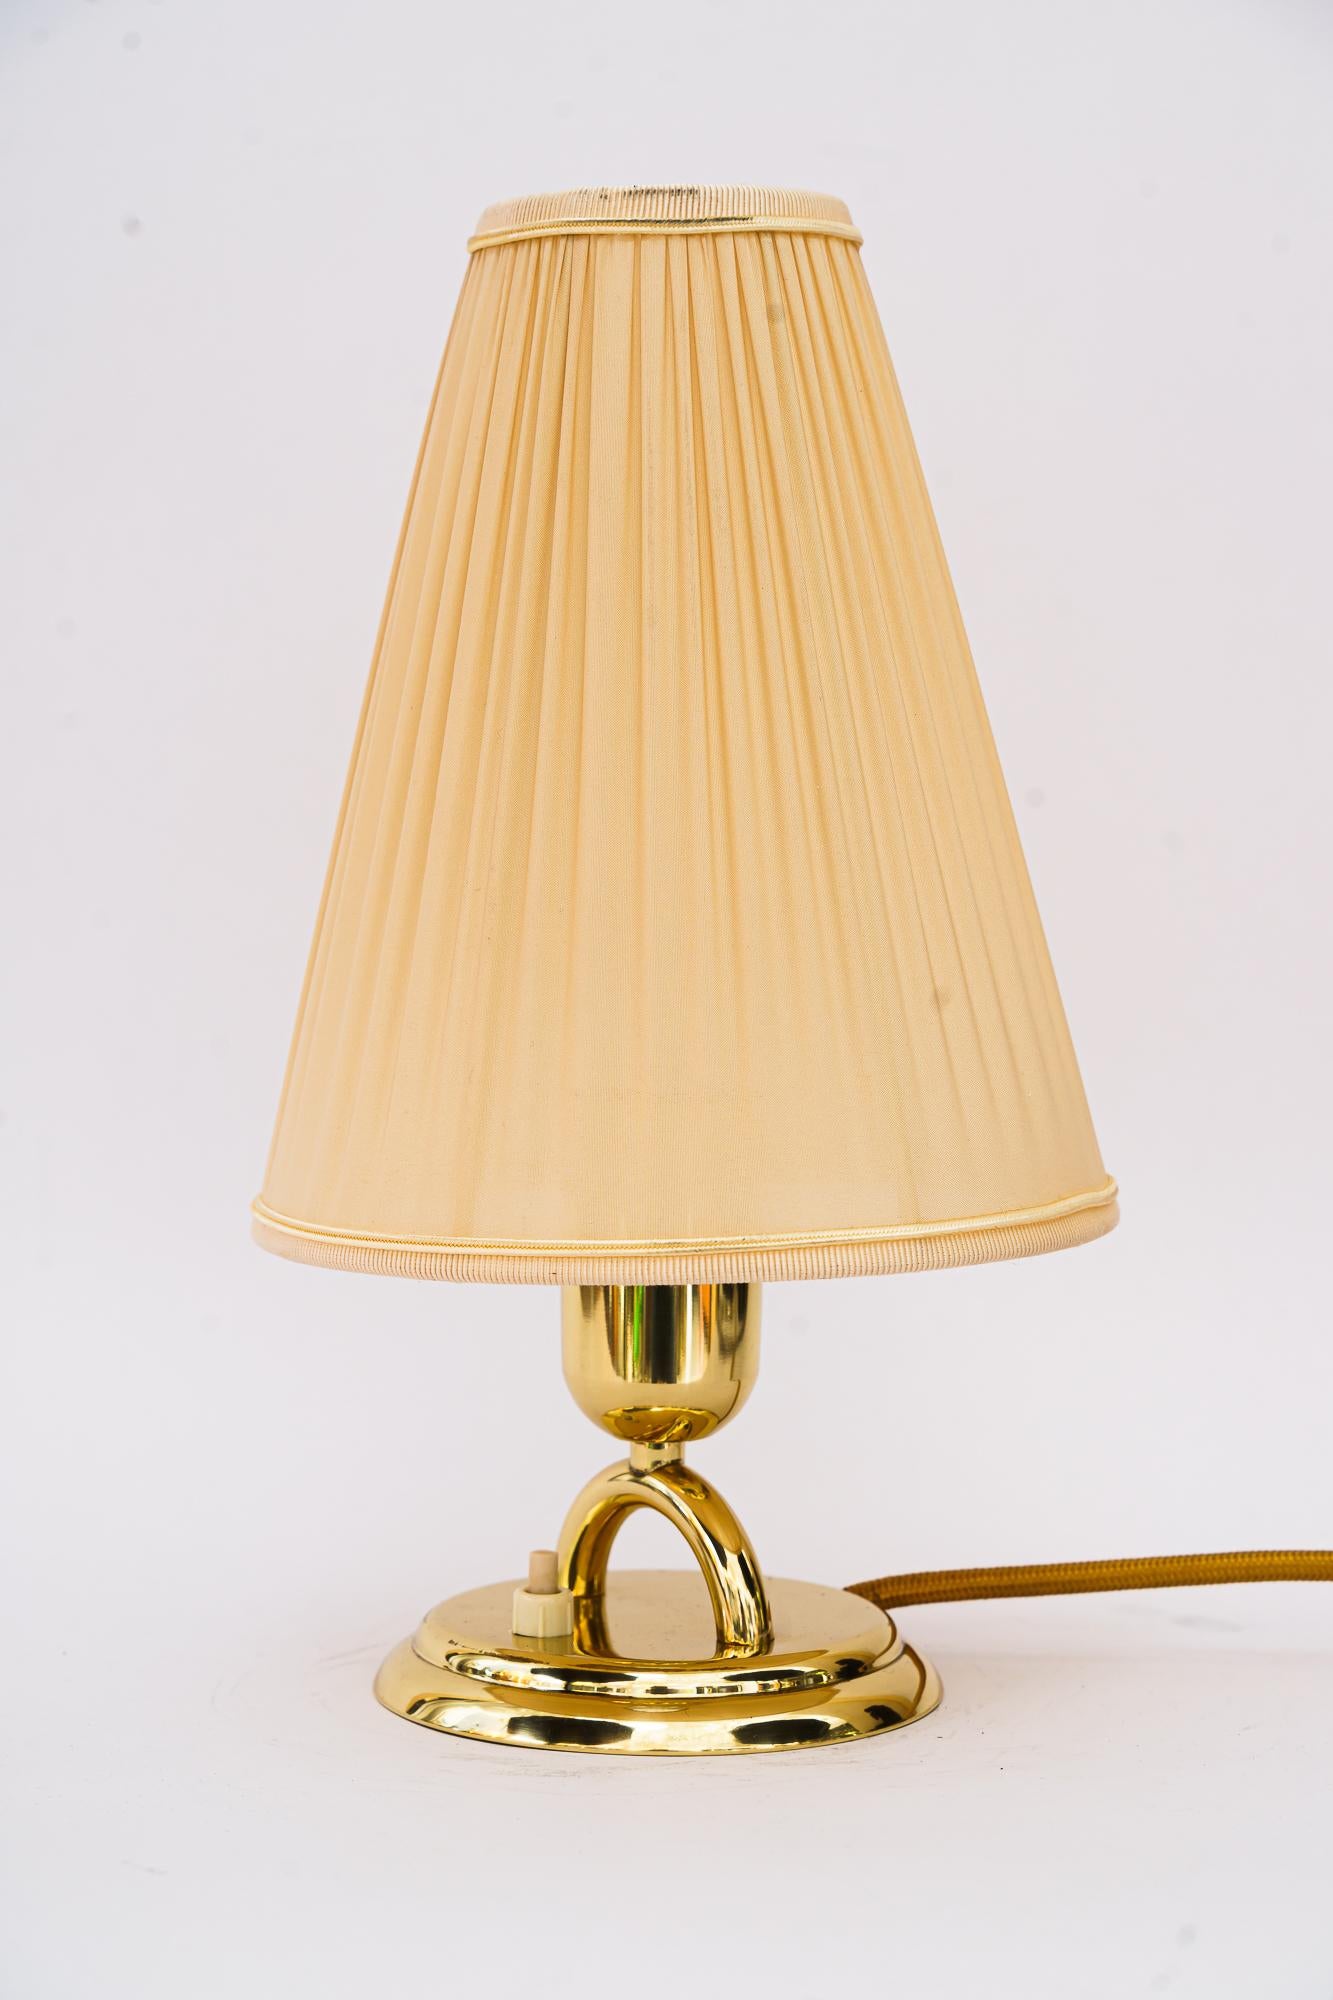 Brass Table lamp with fabric shade vienna around 1950s
Brass polished and stove enameled
The fabric shade is replaced ( new ).